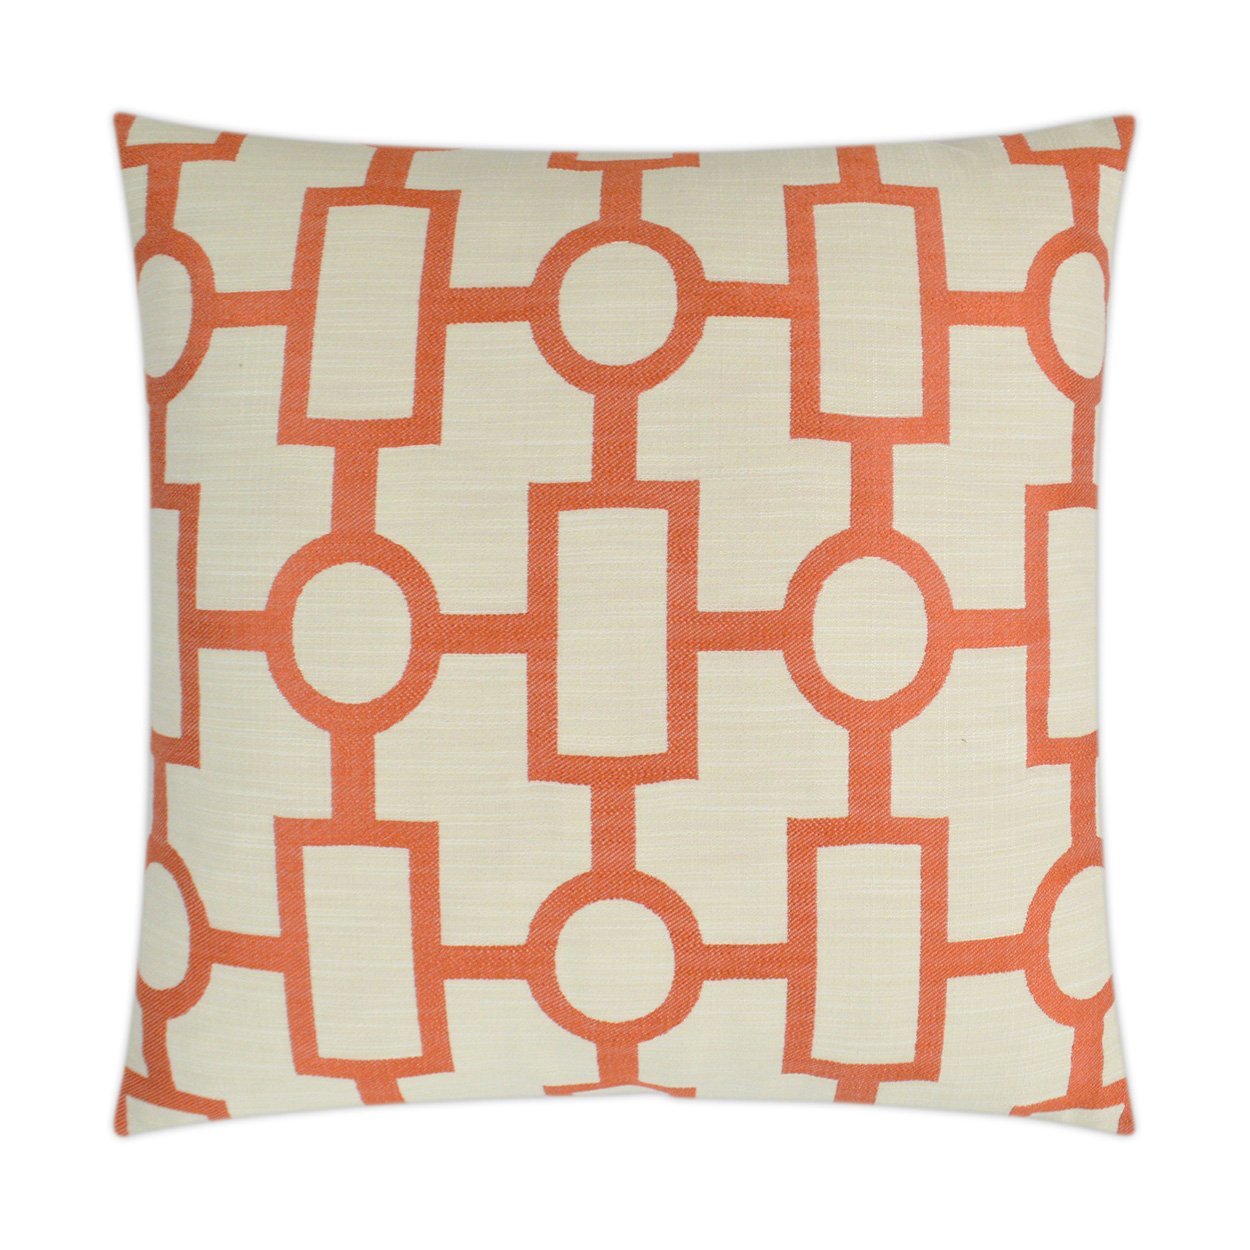 REDUCED TO CLEAR Luxury Pillow - 24" x 24" - Ellington Orange; Coral orange geometric embroidered design in a geometric pattern